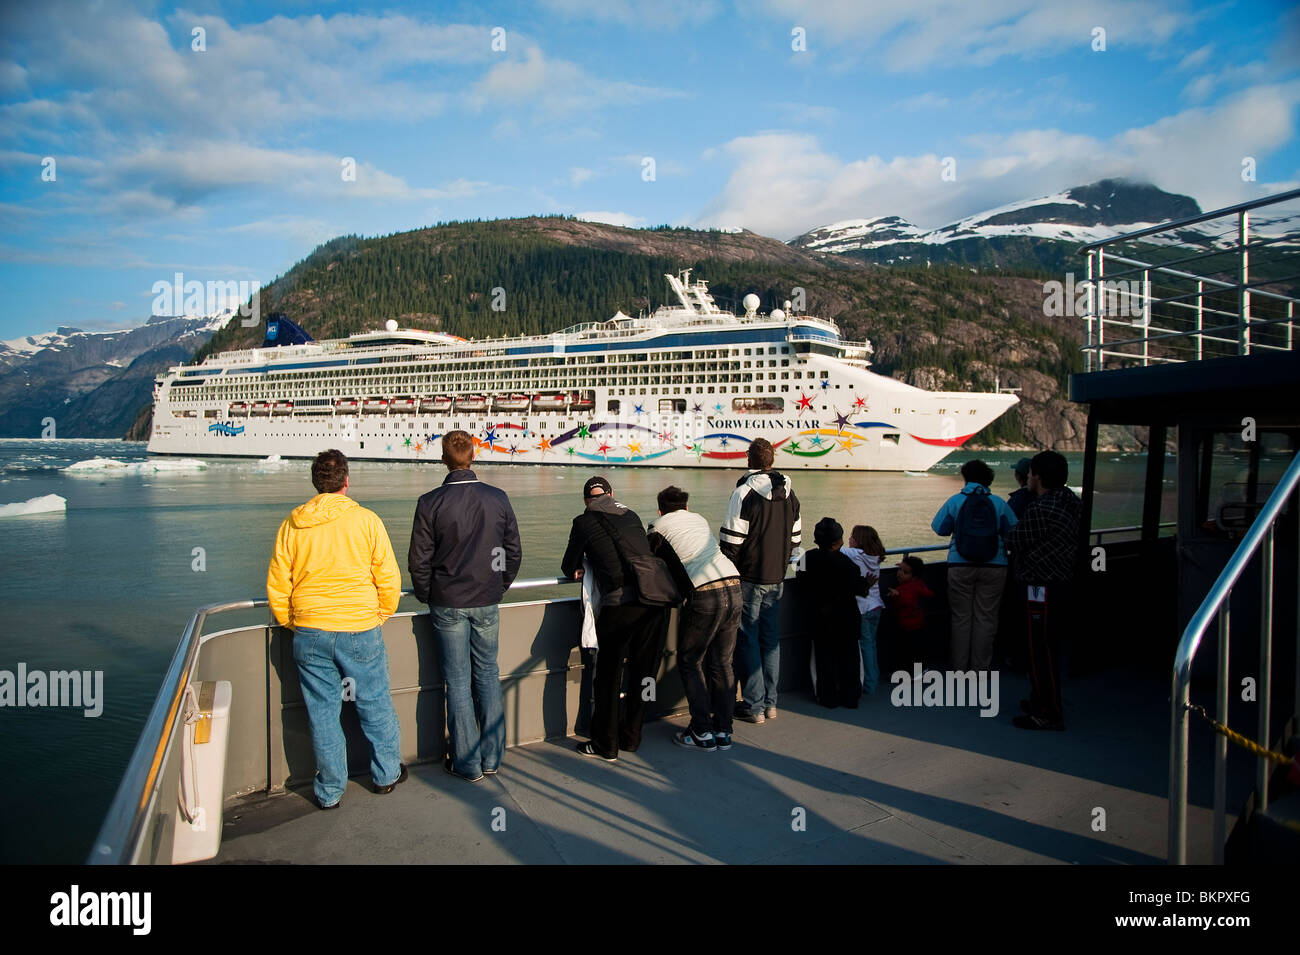 Visitors view Norwegian Cruise Line's *Star* from the deck of another ship in Endicott Arm, Southeast Alaska Stock Photo